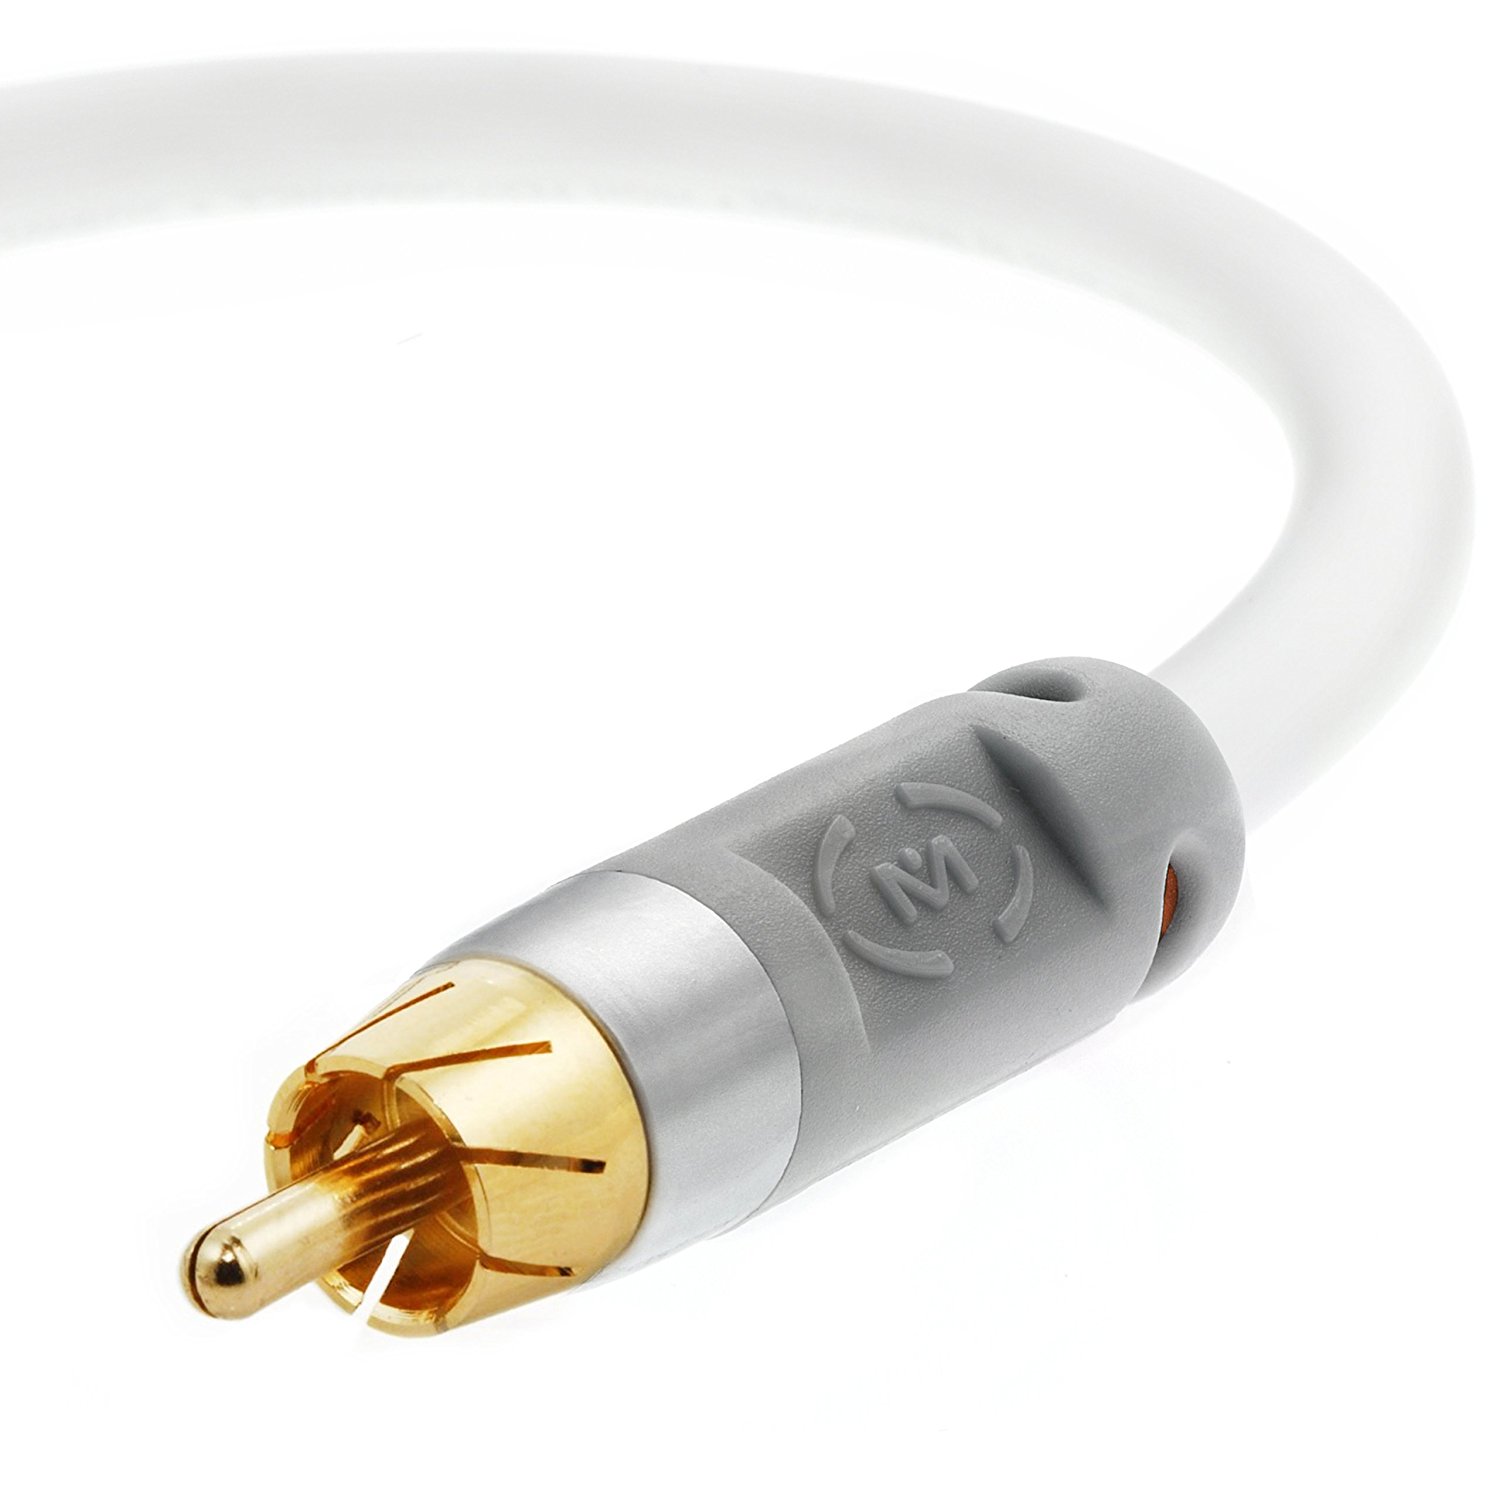 Mediabridge ULTRA Series Digital Audio Coaxial Cable (8 Feet) - Dual Shielded with RCA to RCA Gold-Plated Connectors - White - (Part# CJ08-6WR-G2 ) - image 1 of 4